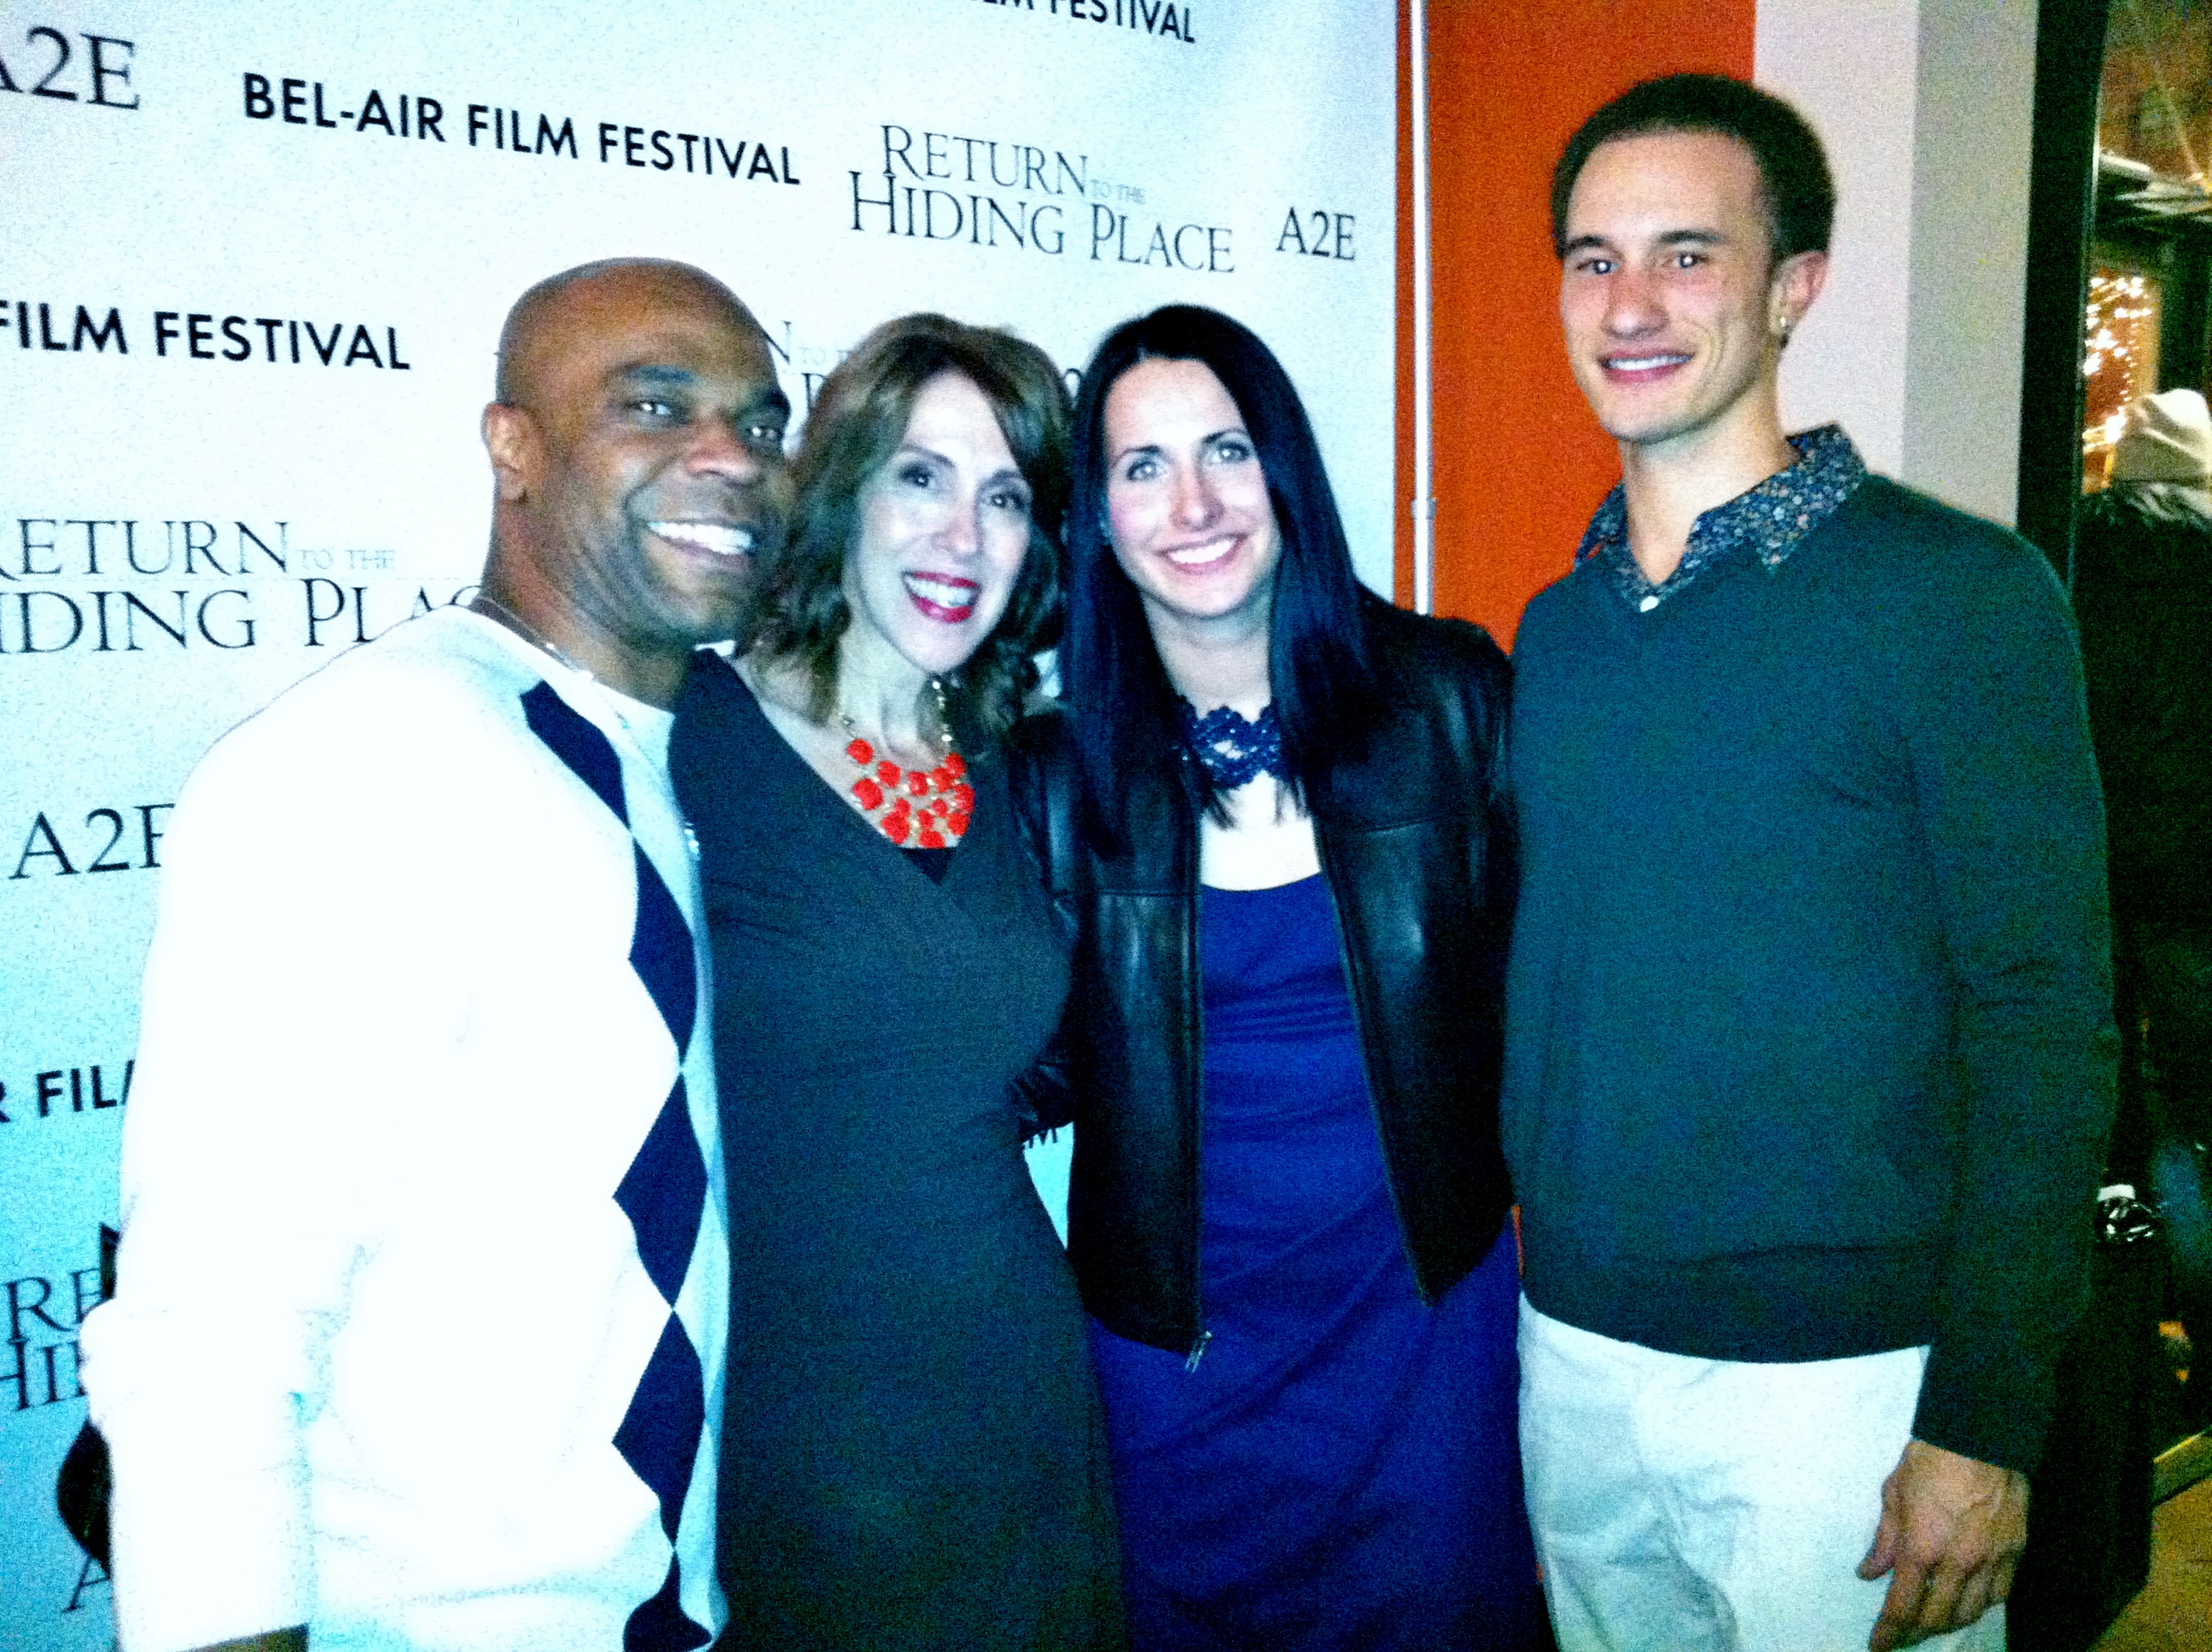 2014 Olympic Speed Skater Lauren Cholewinski and her coach and teammate at the Park City premiere during Sundance.